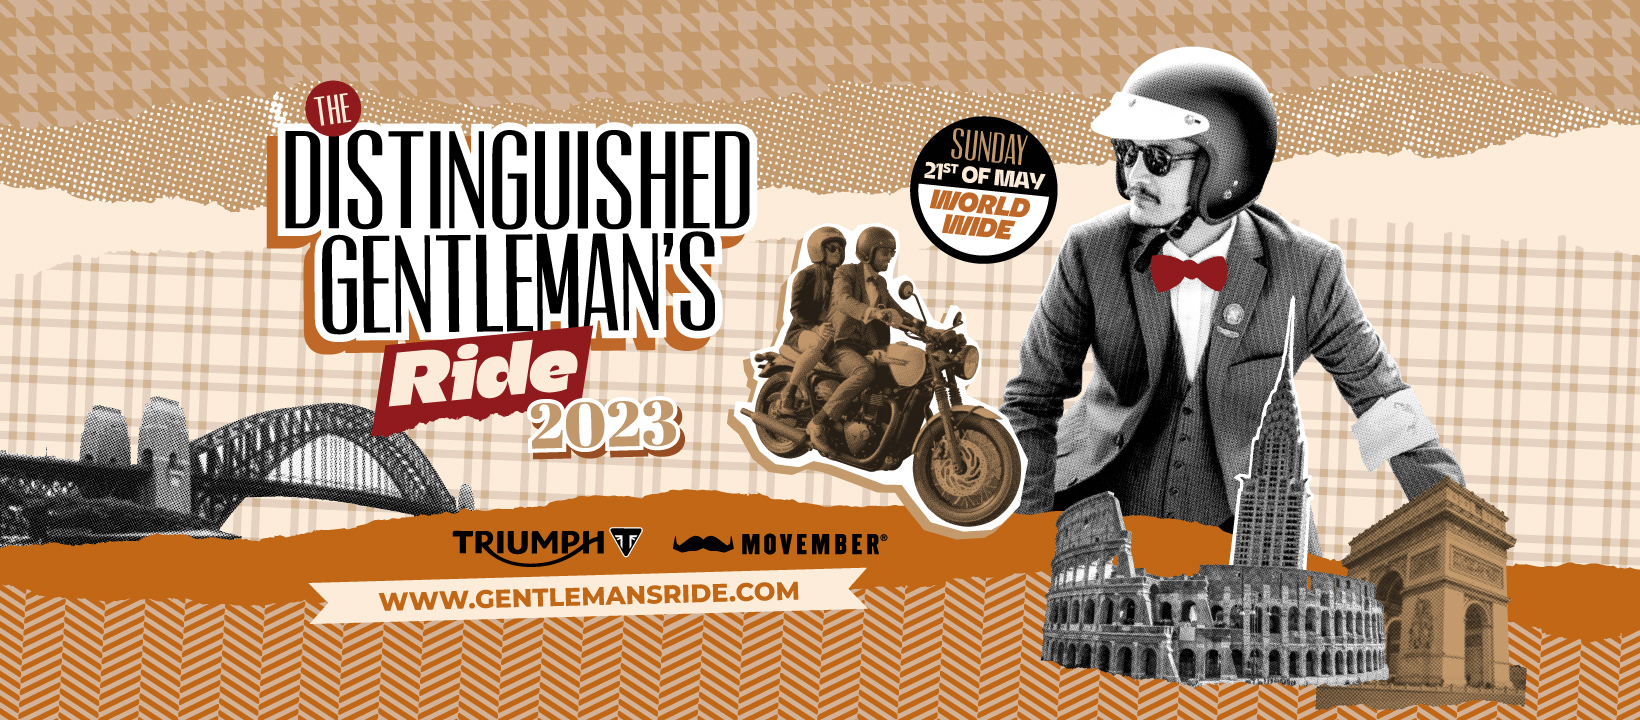 I’m Riding For Men’s Health In The Distinguished Gentleman’s Ride